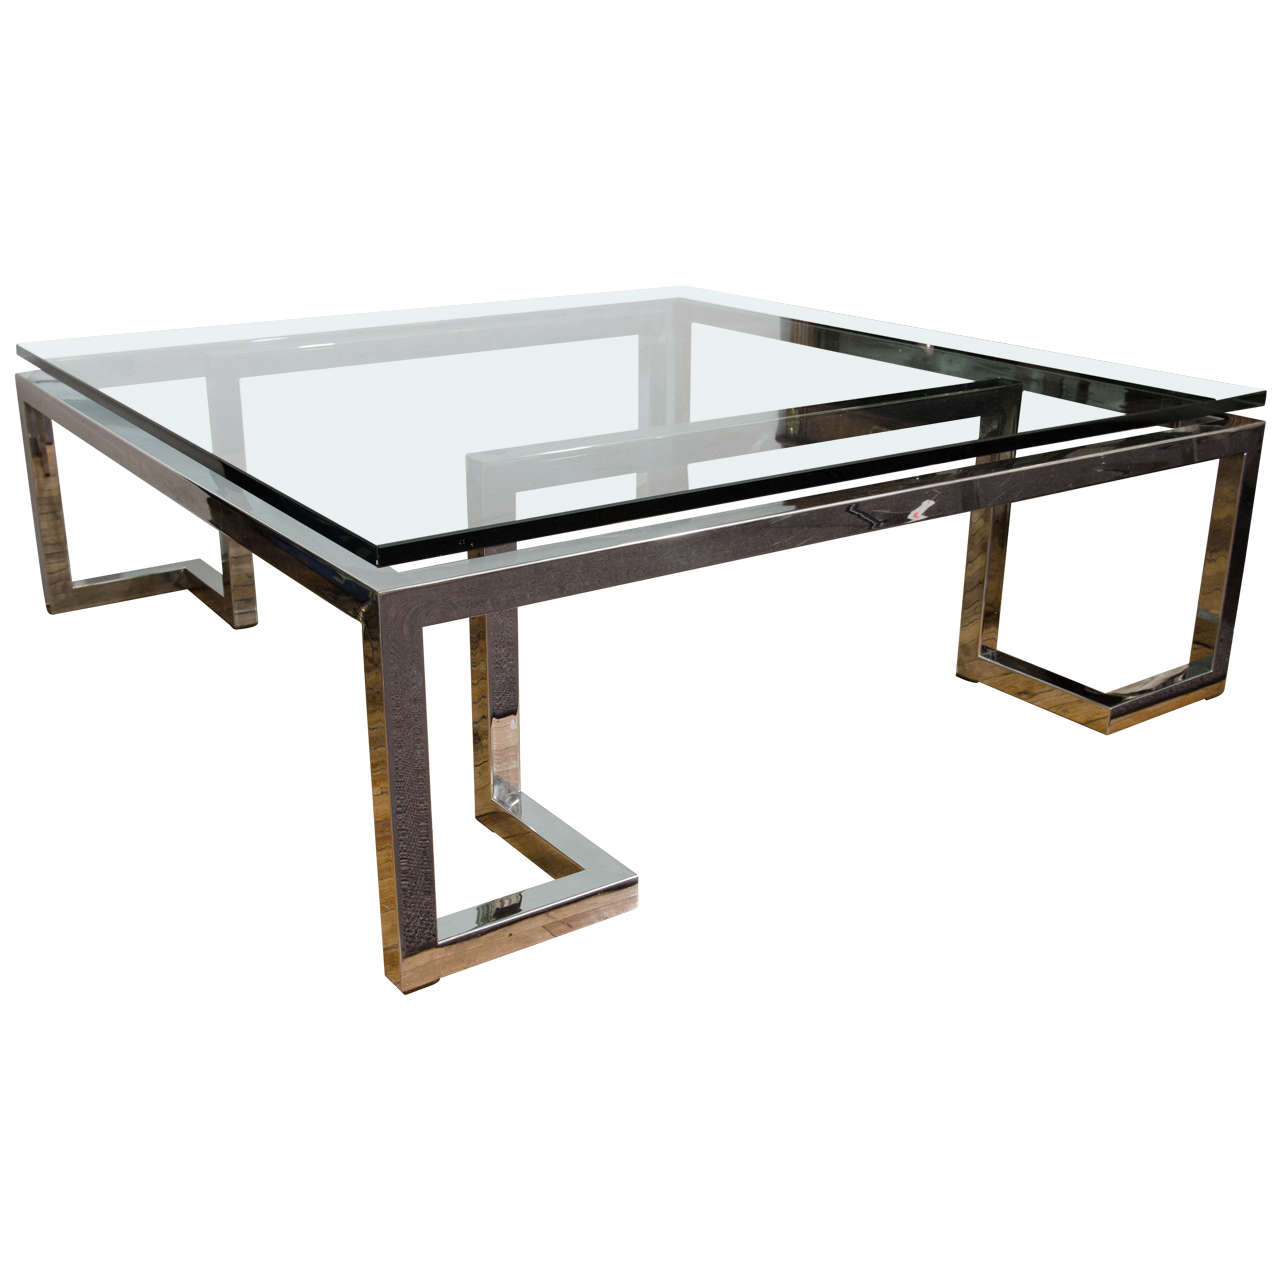 Midcentury Glass Top Coffee or Cocktail Table with Chrome Geometric Base